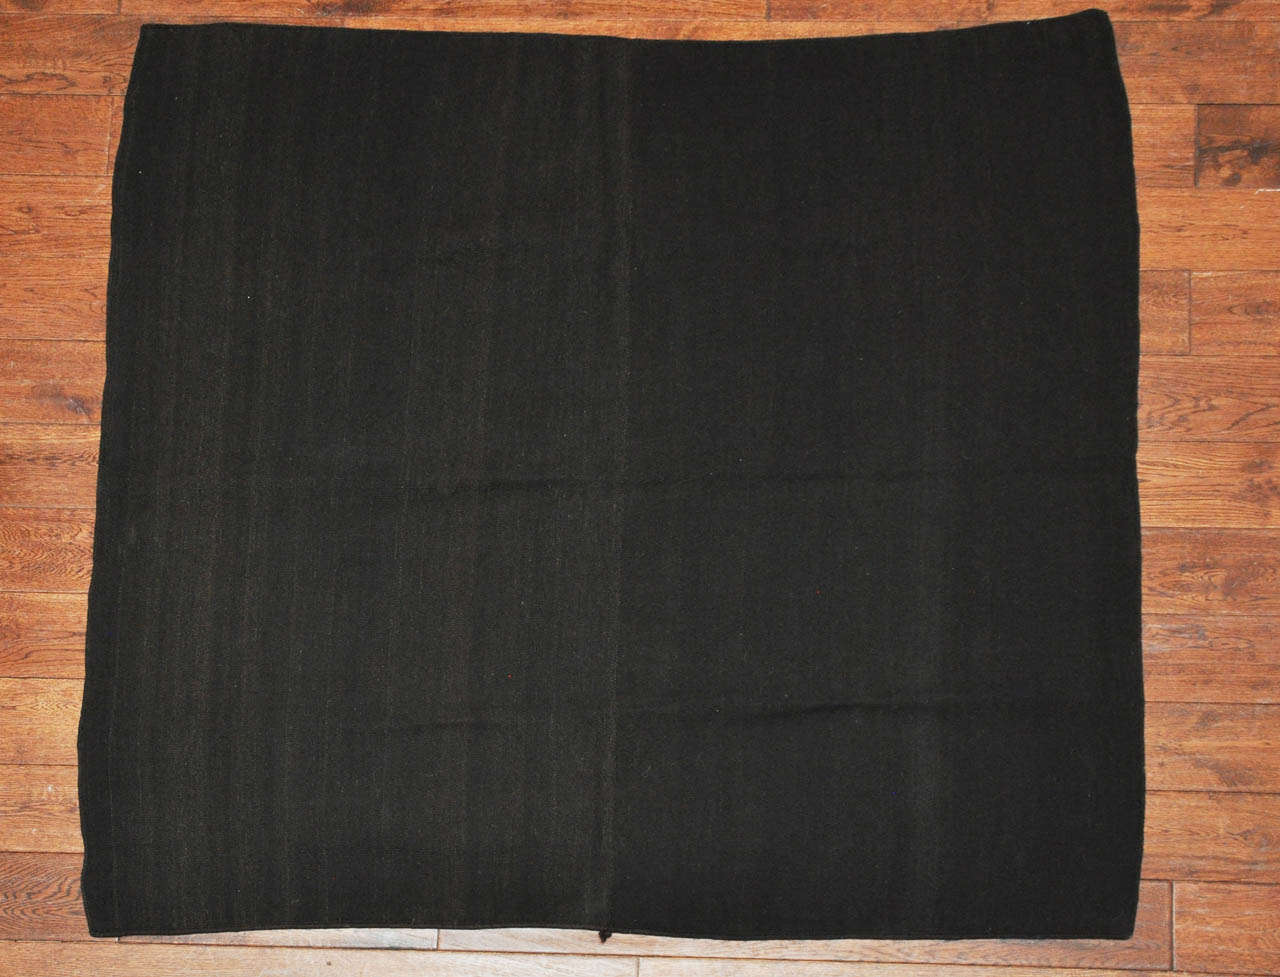 Worn by the Aymara peoples of Bolivia during mourning. This rare early 20th century piece is made of over dyed black sheep wool.